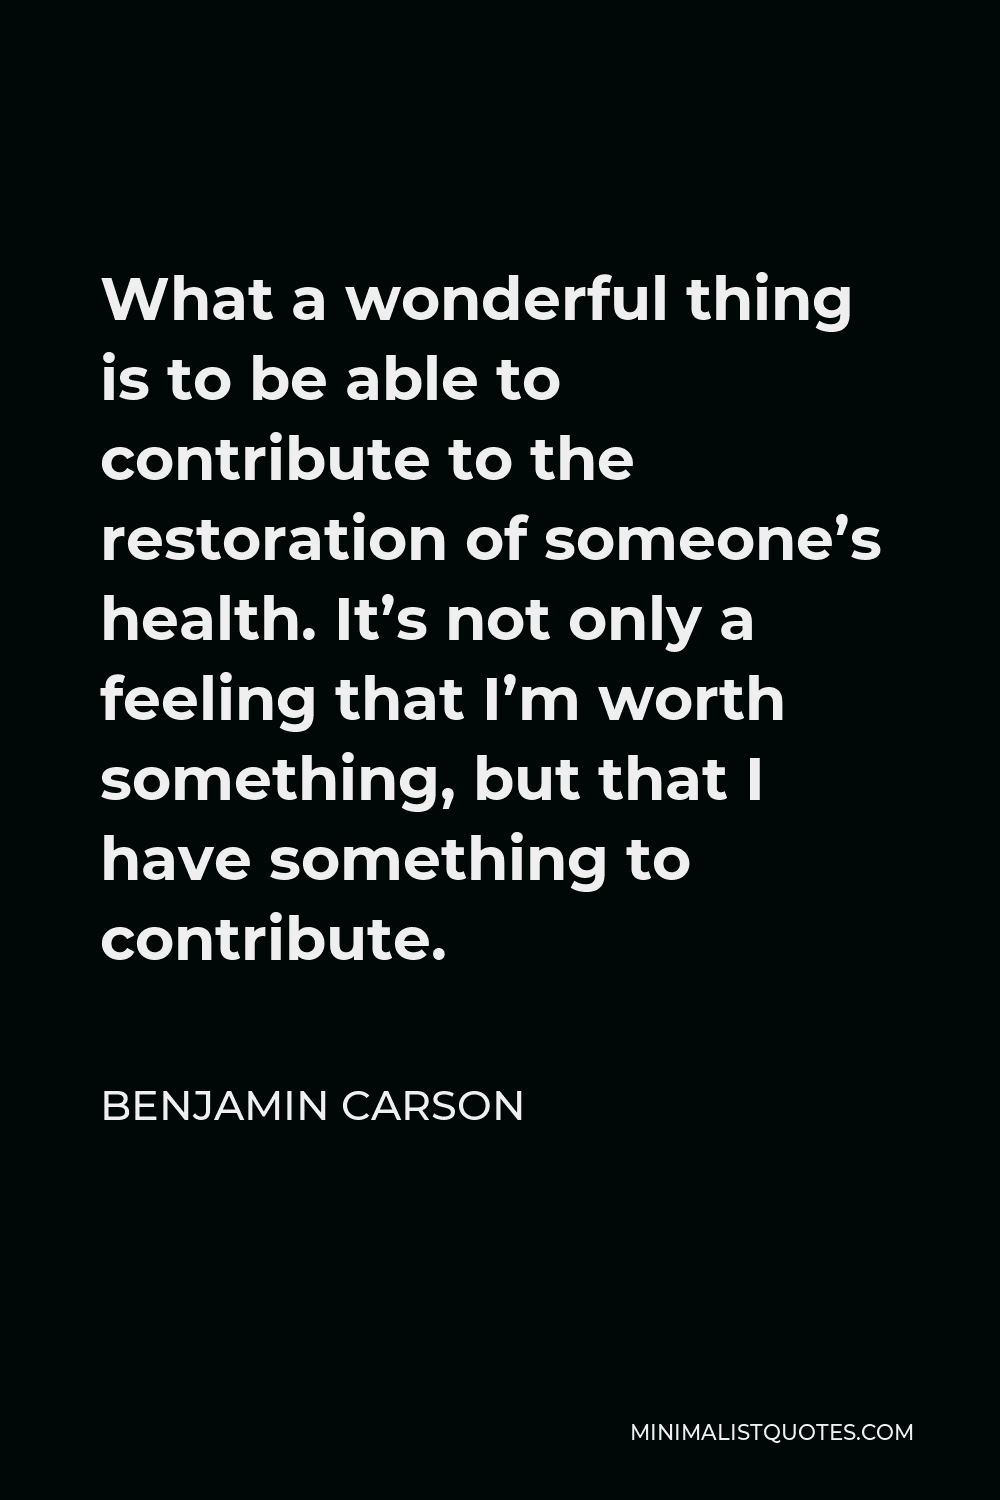 Benjamin Carson Quote - What a wonderful thing is to be able to contribute to the restoration of someone’s health. It’s not only a feeling that I’m worth something, but that I have something to contribute.